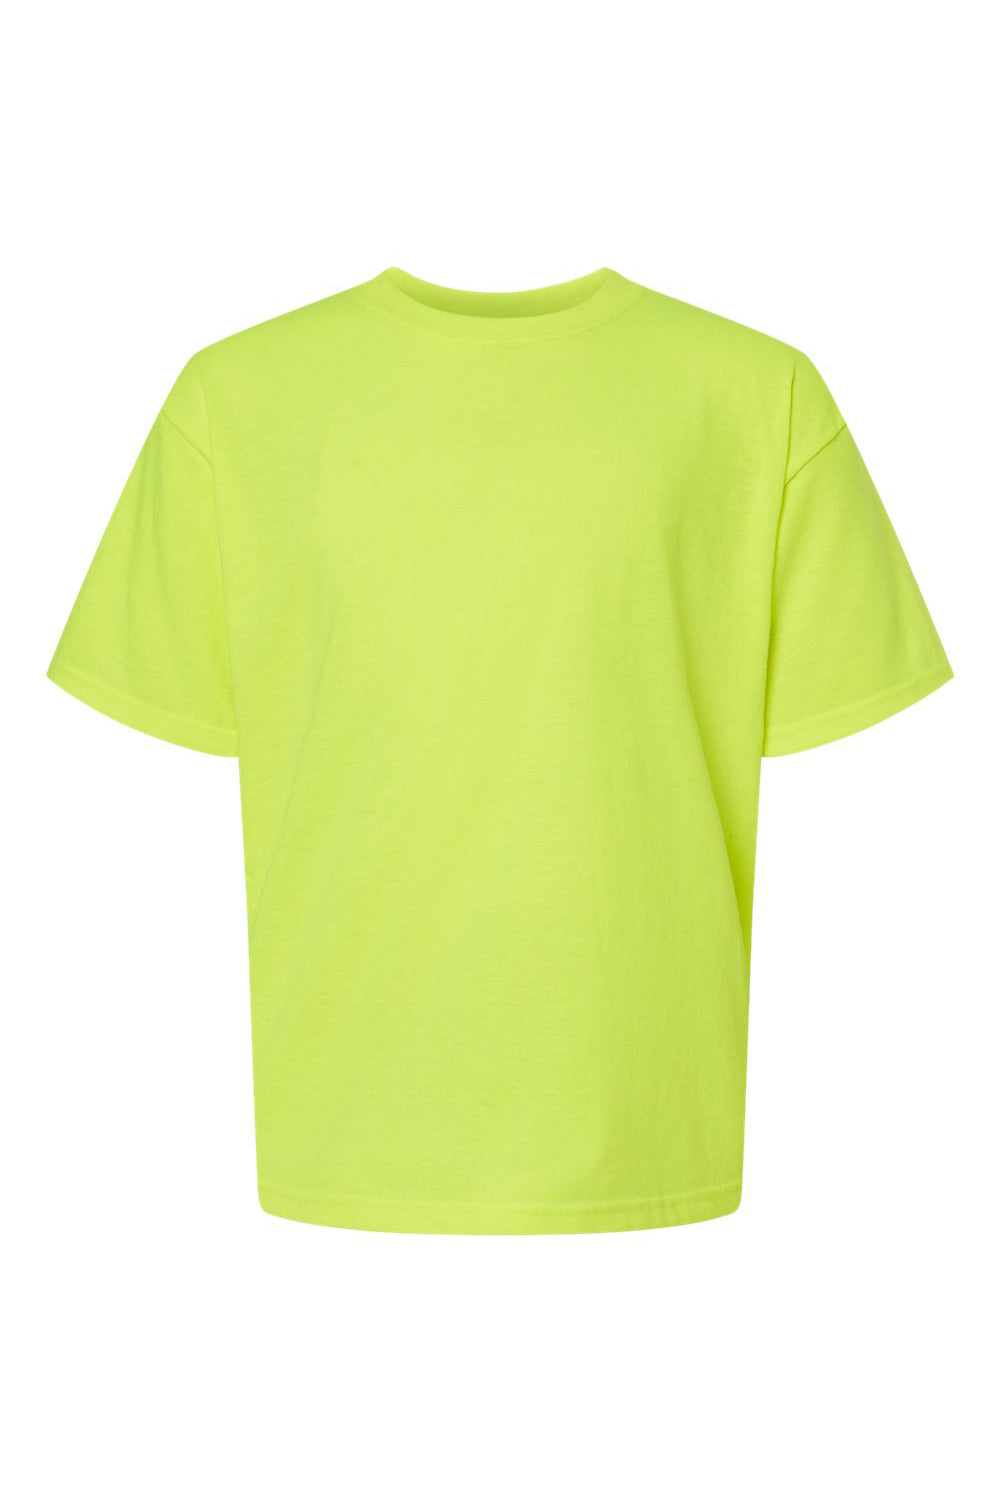 M&O 4850 Youth Gold Soft Touch Short Sleeve Crewneck T-Shirt Safety Green Flat Front